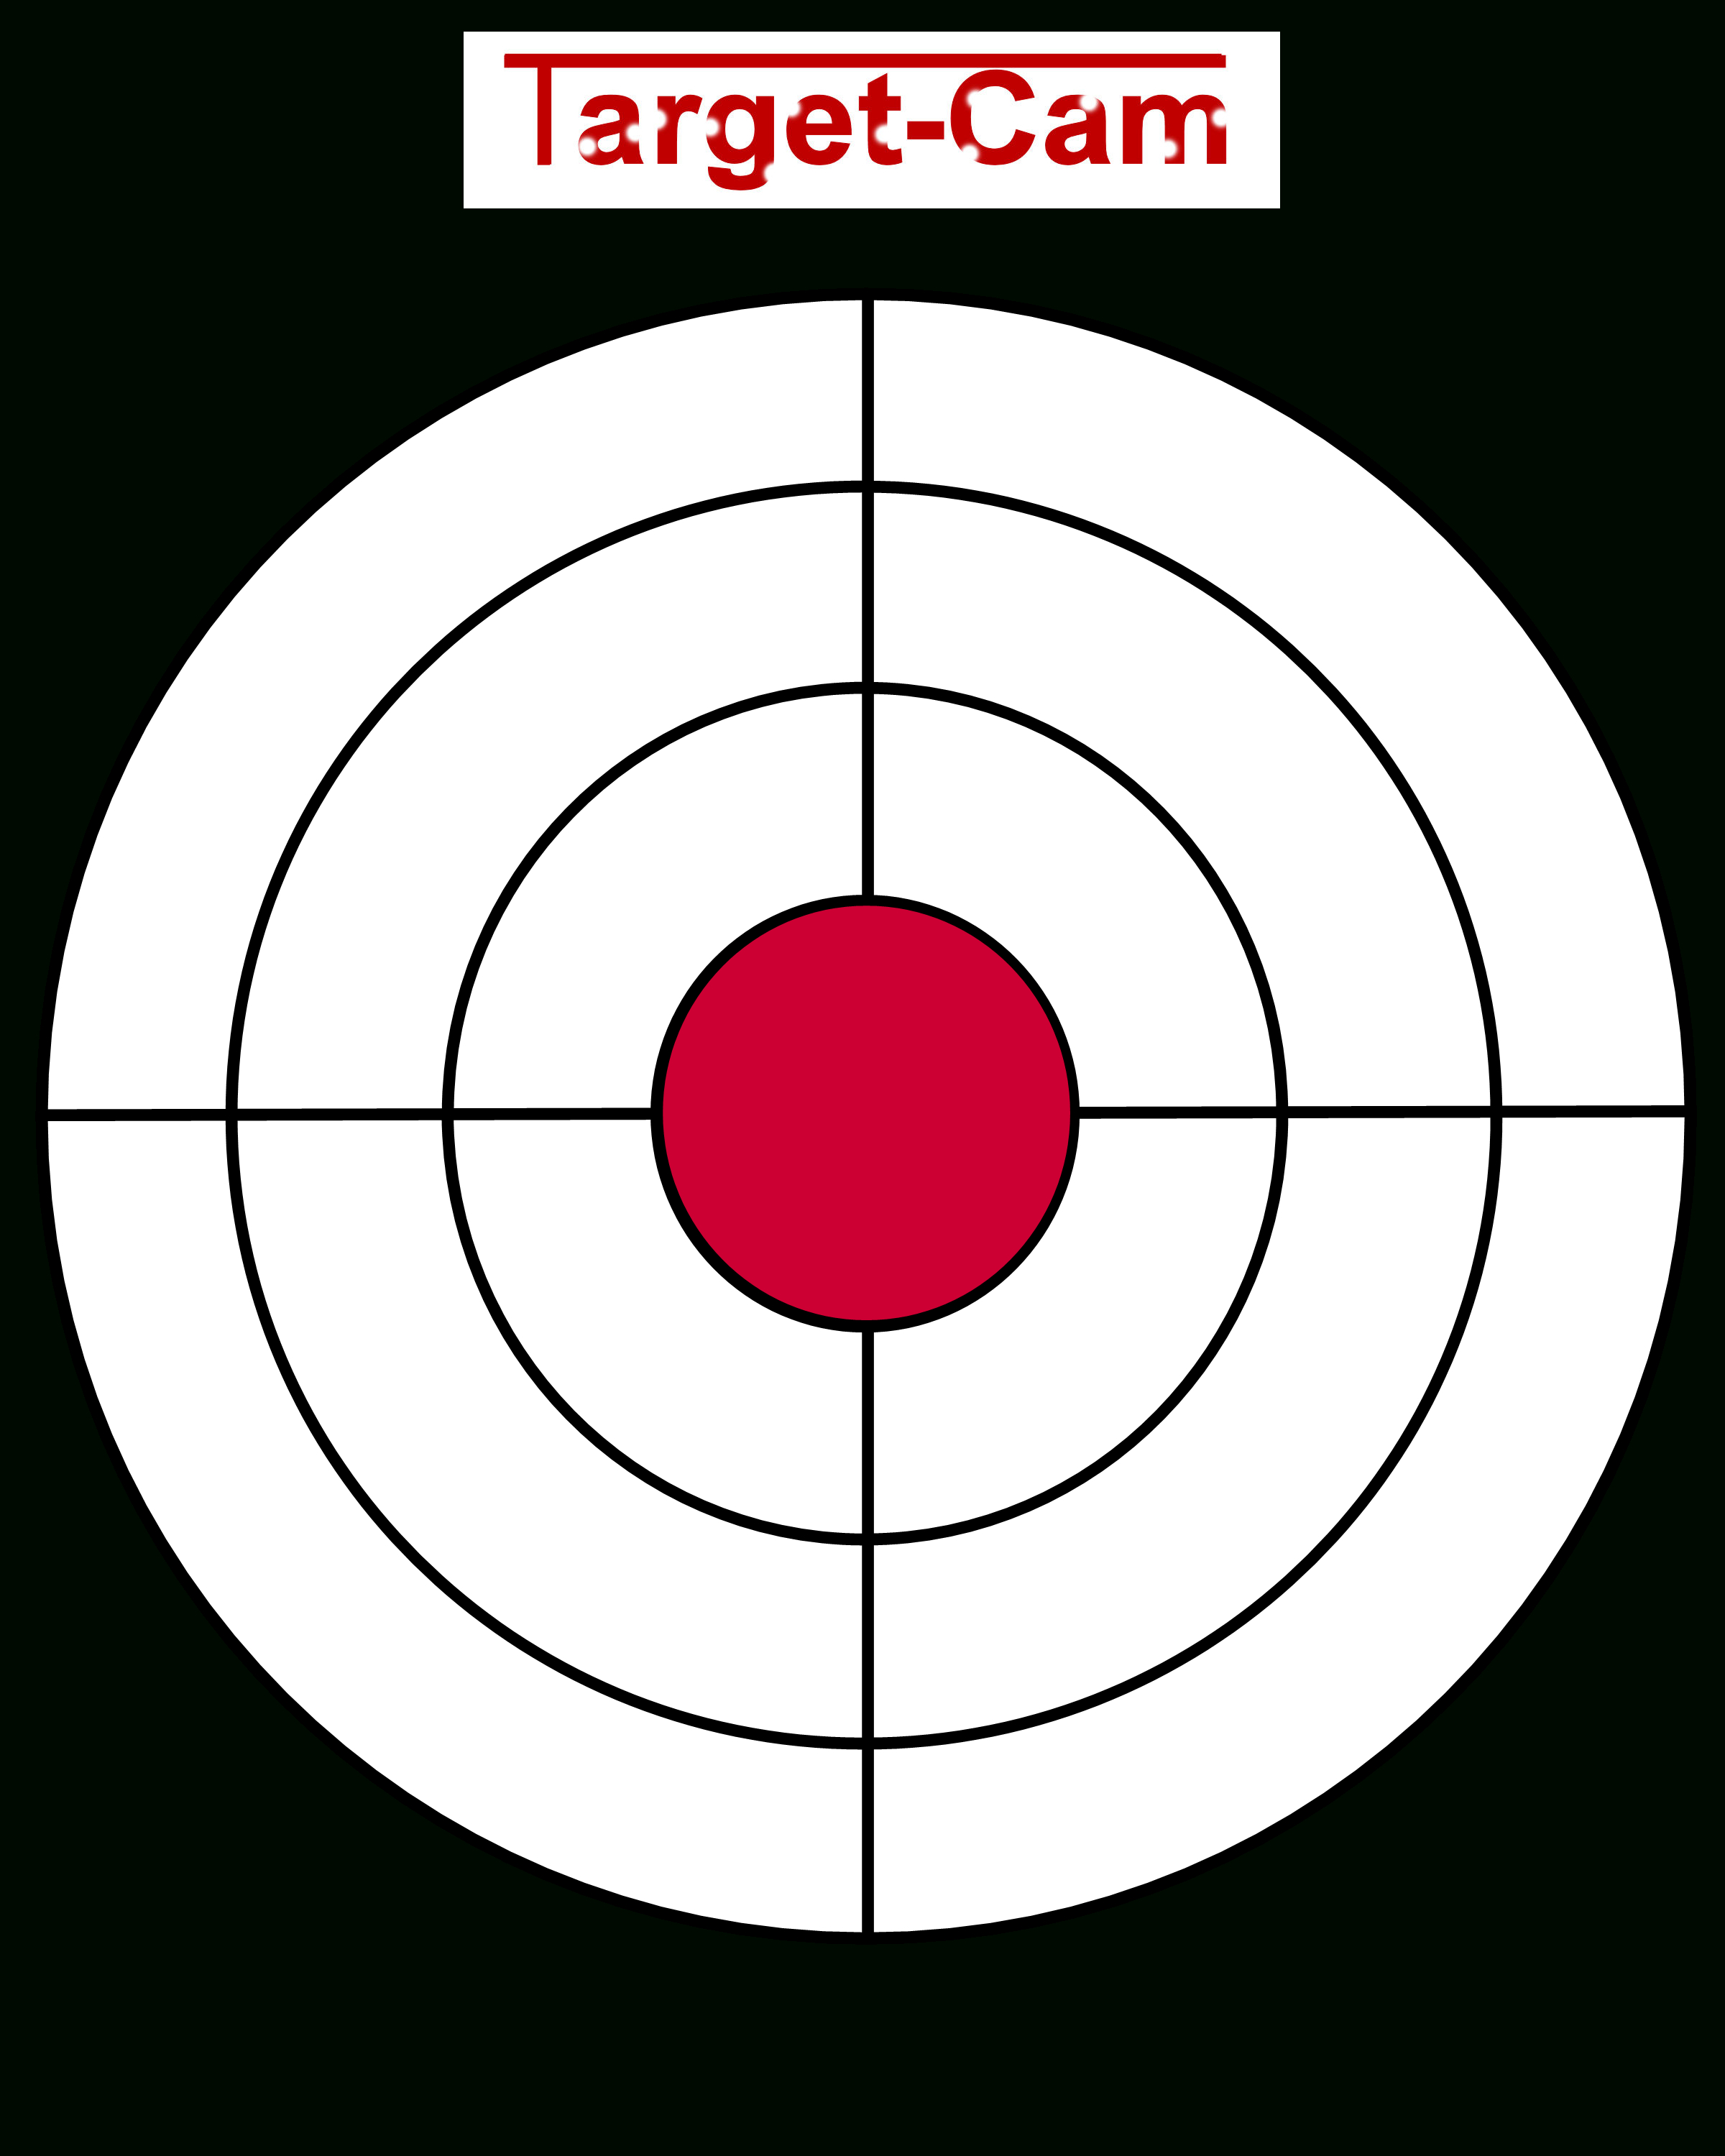 Free Gun Targets To Print | New &quot;target-Cam&quot; Rifle And Hand Gun - Free Printable Shooting Targets